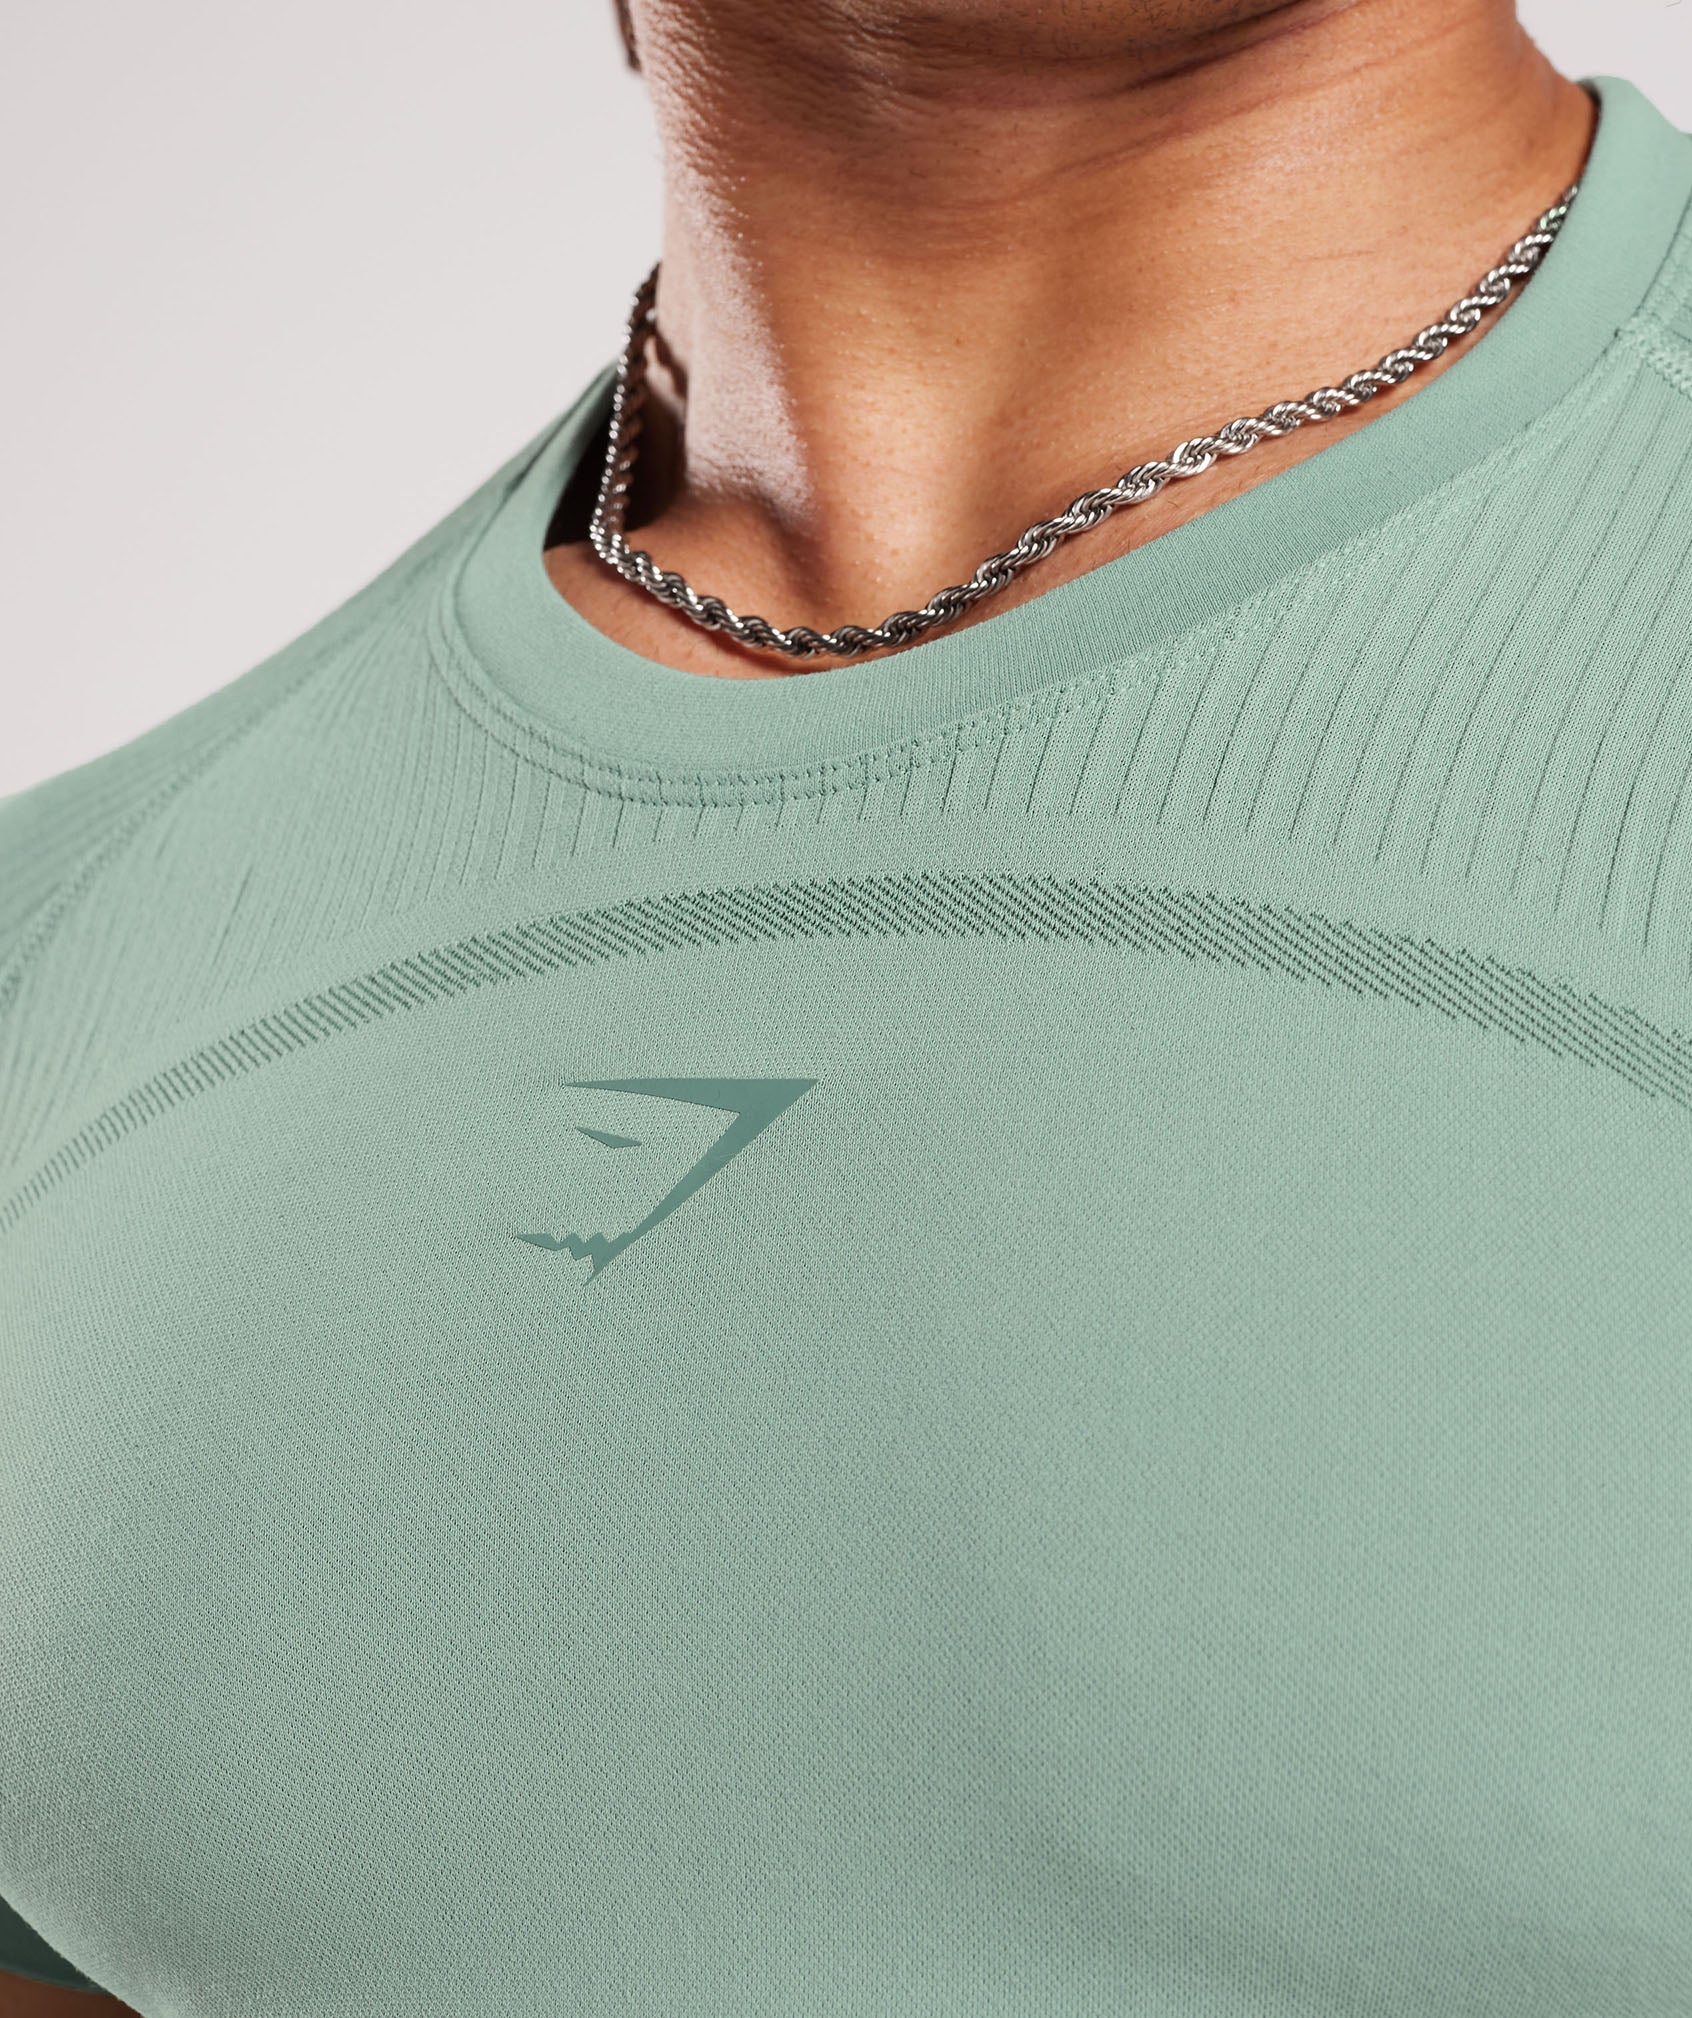 315 Seamless T-Shirt in Frost Teal/Ink Teal - view 6